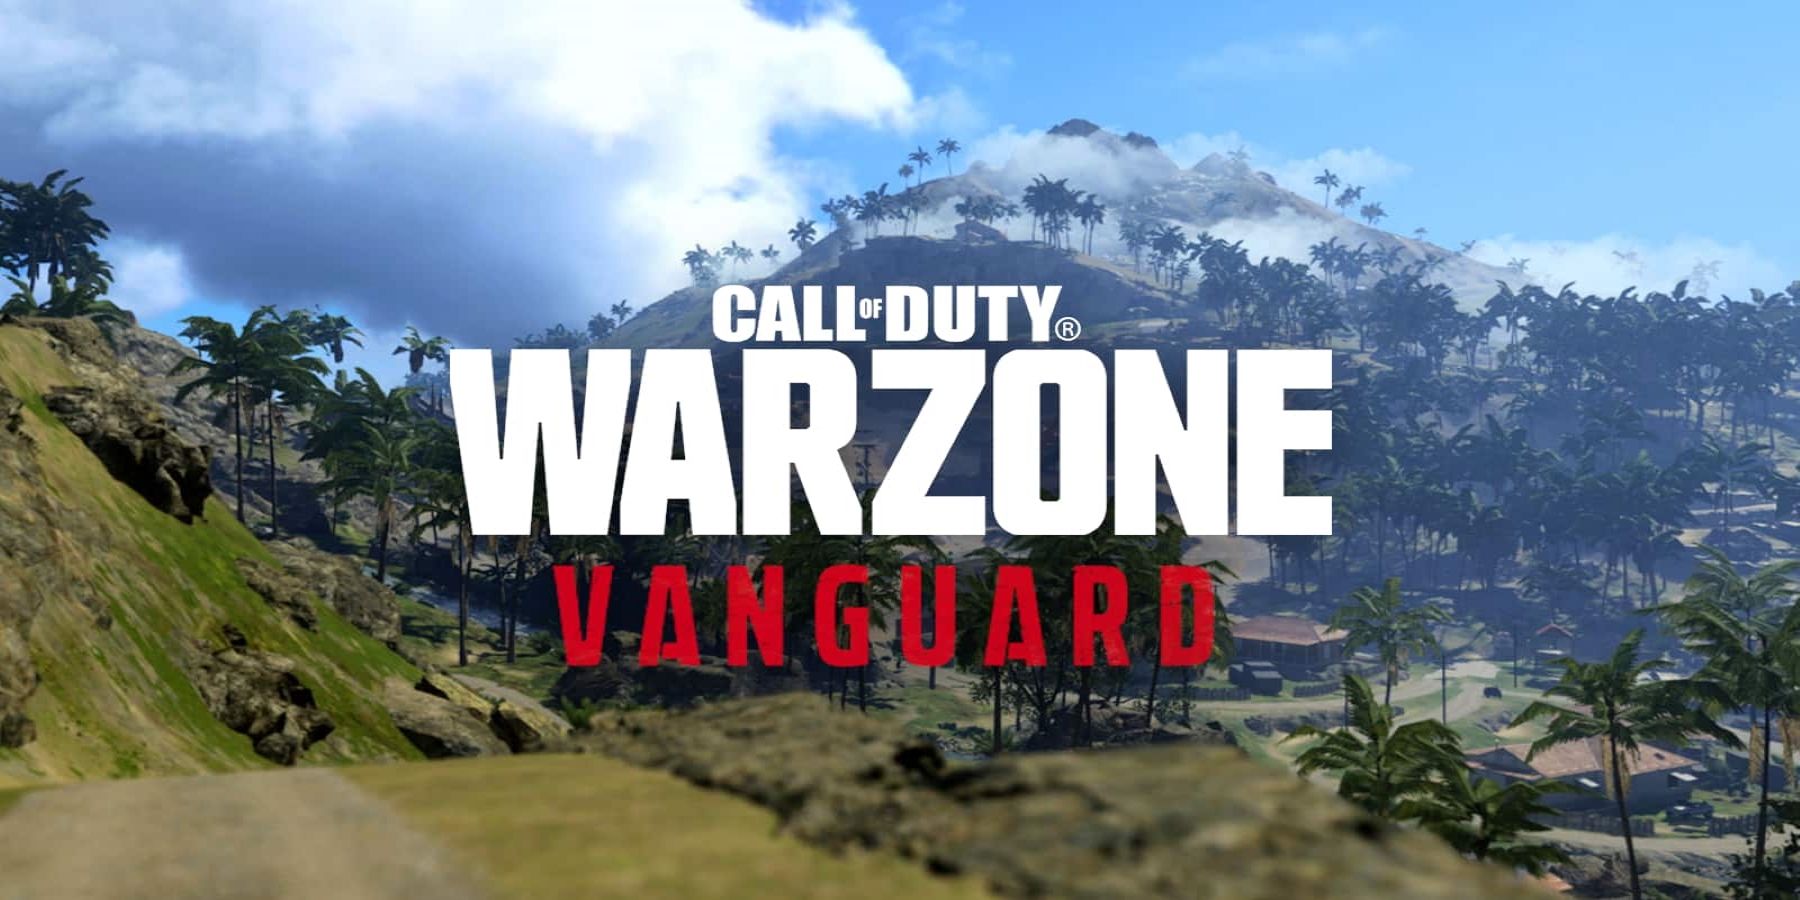 call of duty warzone new map vanguard